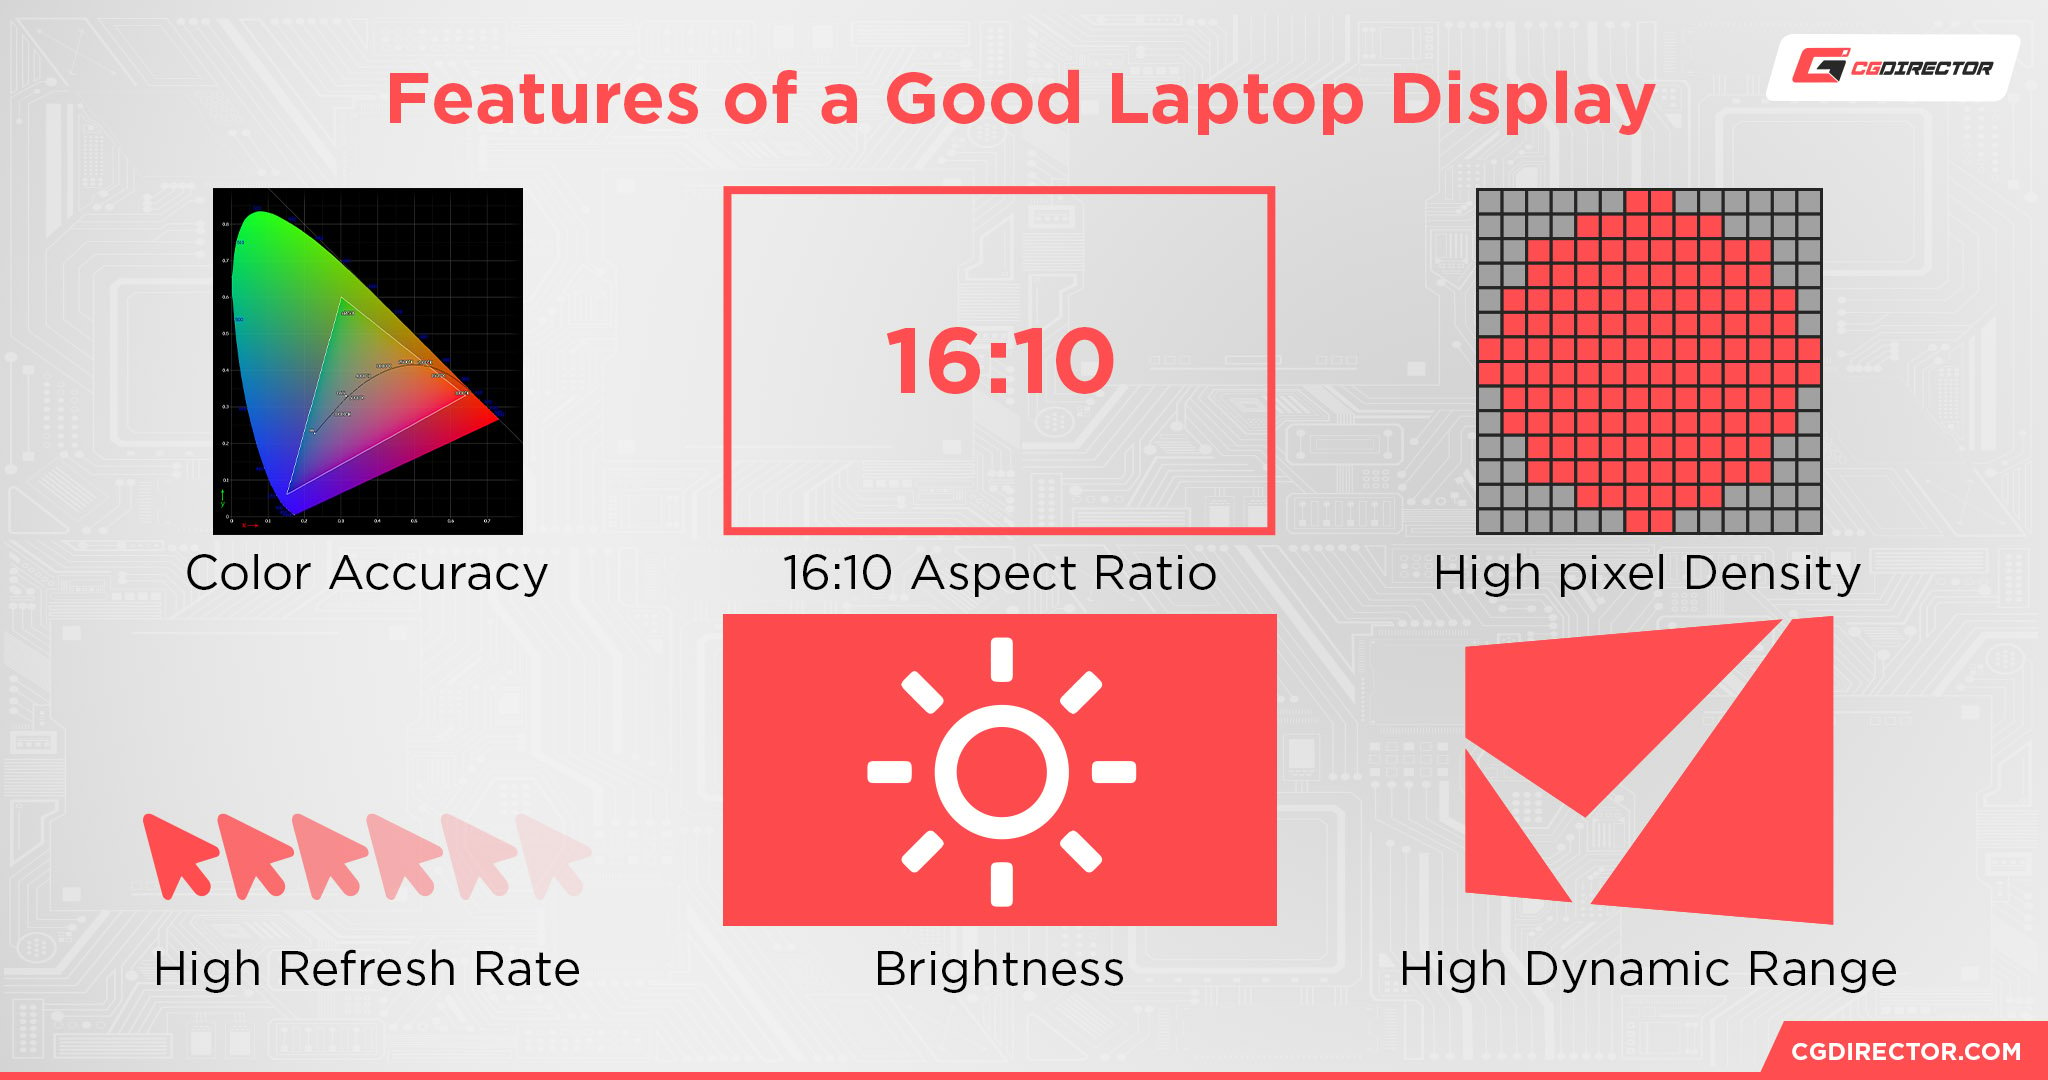 Features of a Good Laptop Display